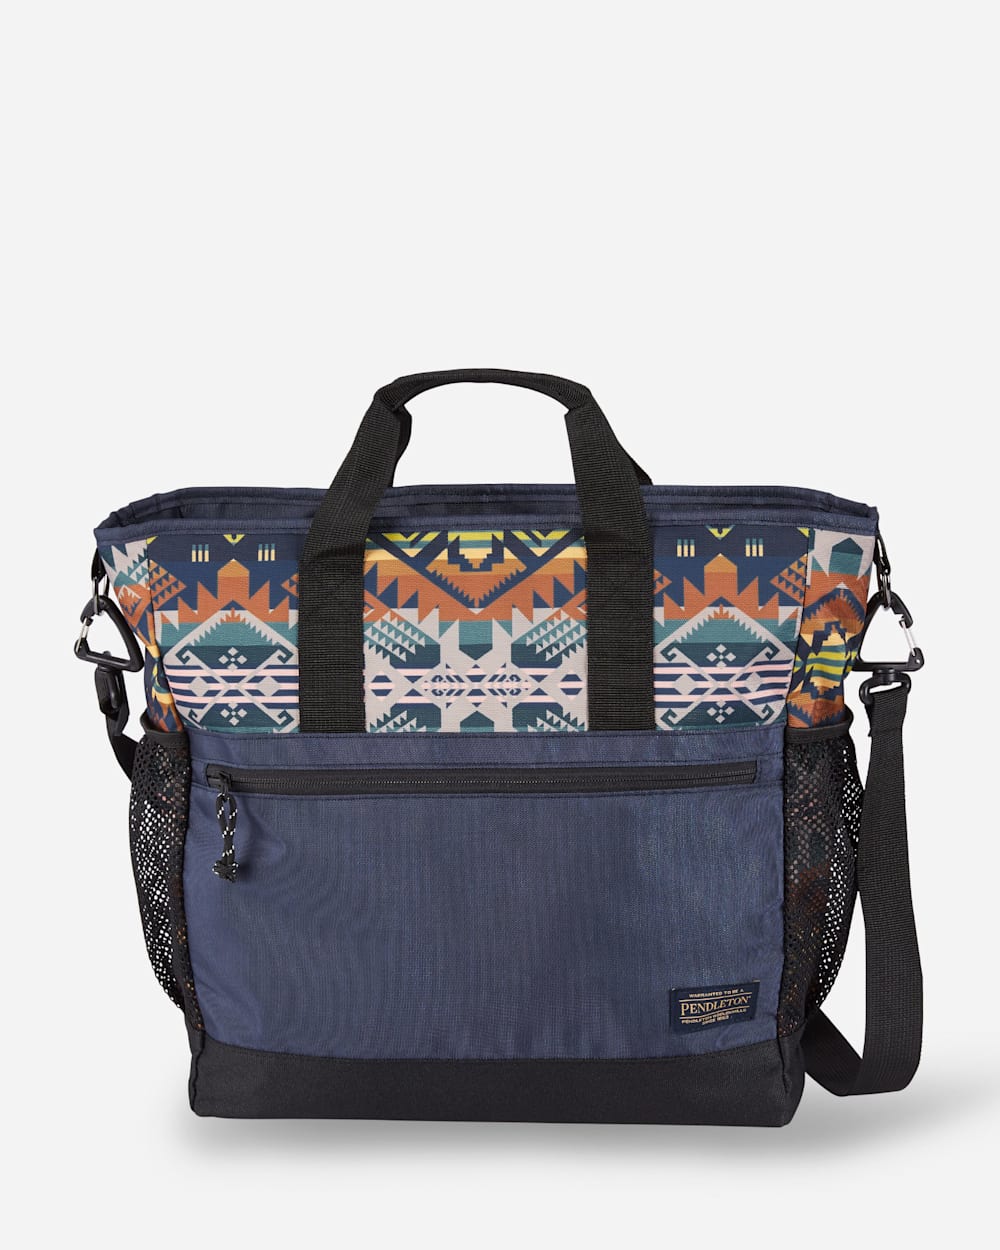 JOURNEY WEST CARRYALL TOTE image number 1